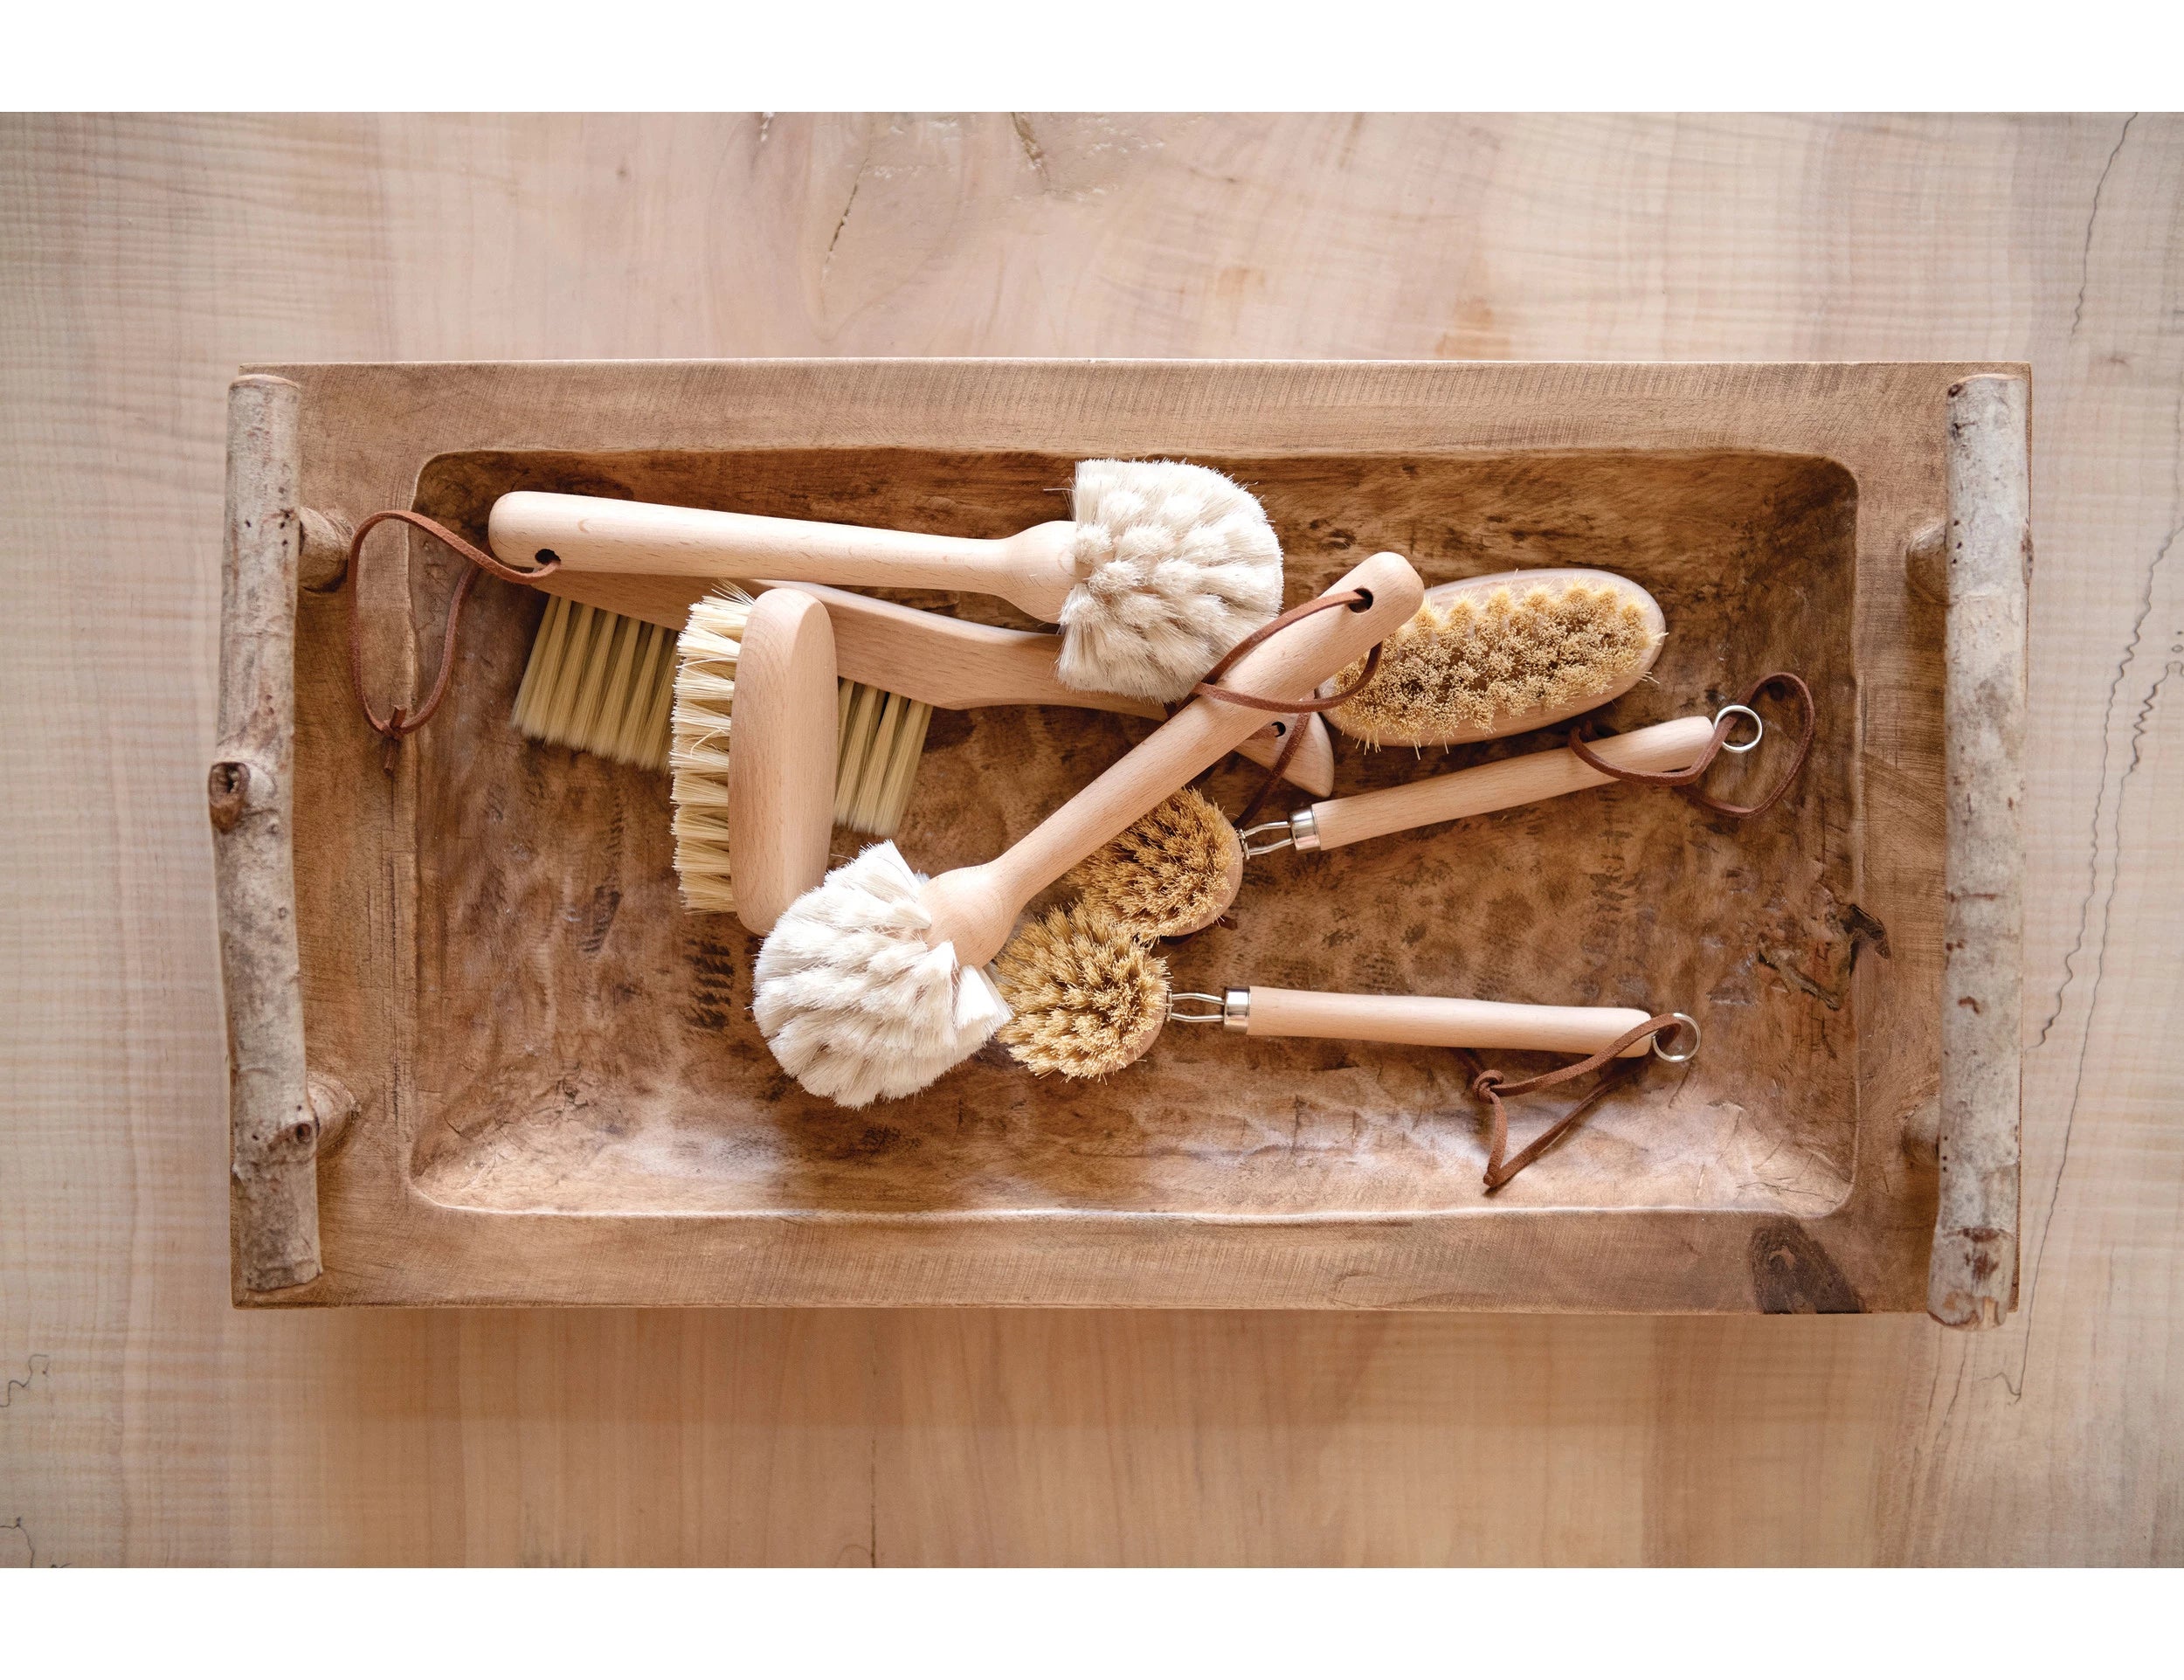 White bristle Beech Wood Dish Brush with Leather Strap and other cleaning brushes by Creative Co-Op in wooden tray.